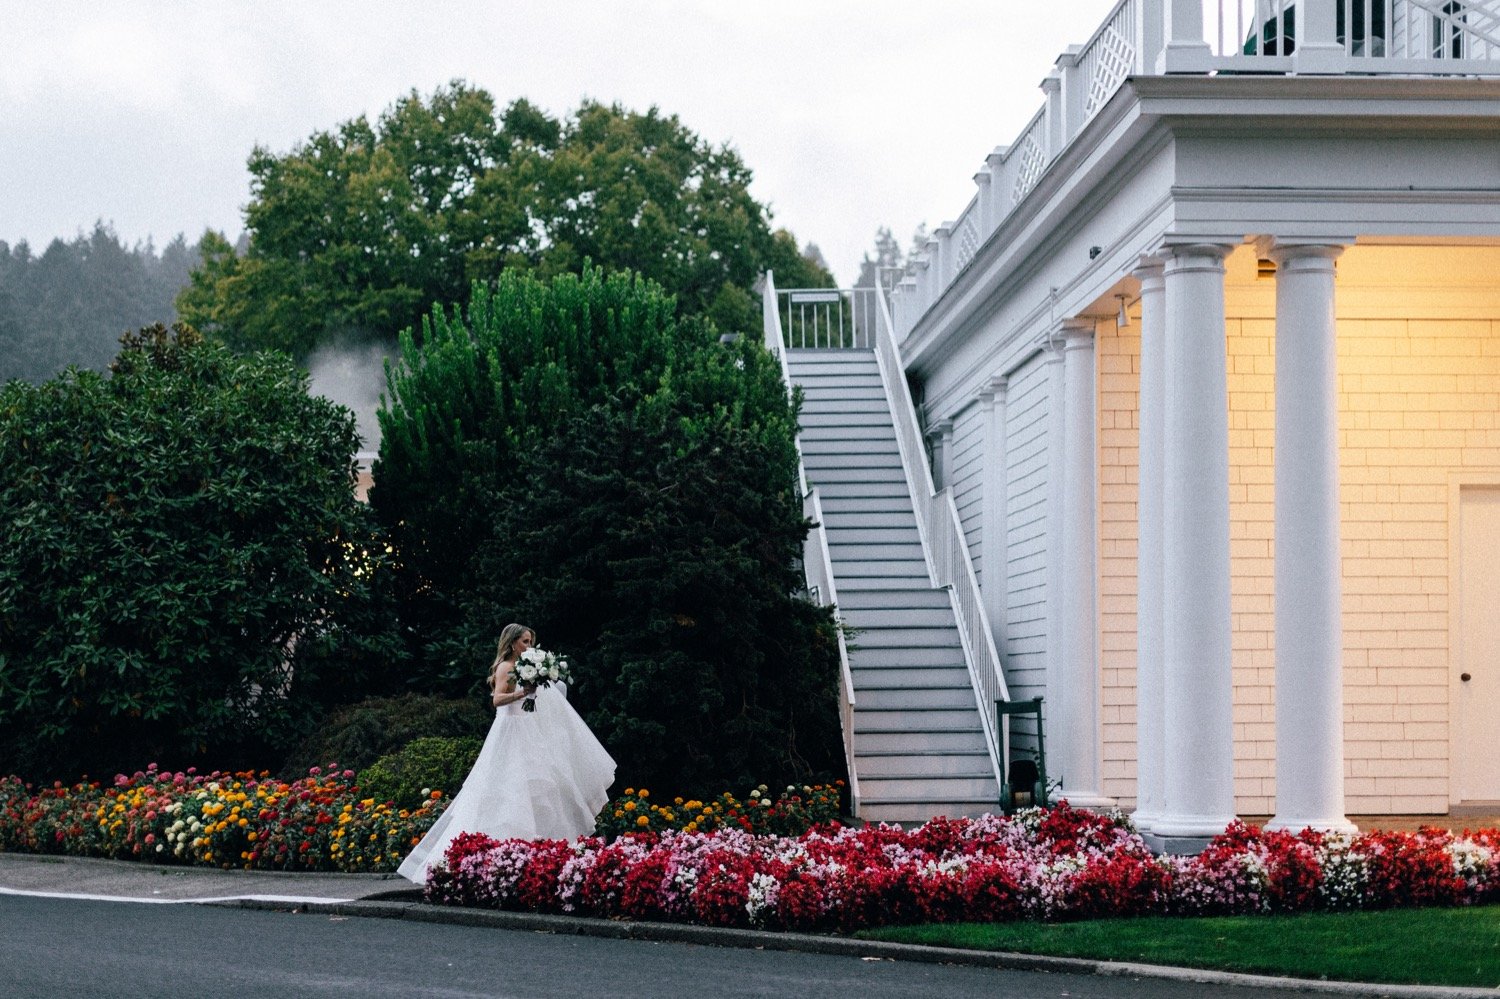  Bride in white dress holds flowers and dress while walking toward white building 